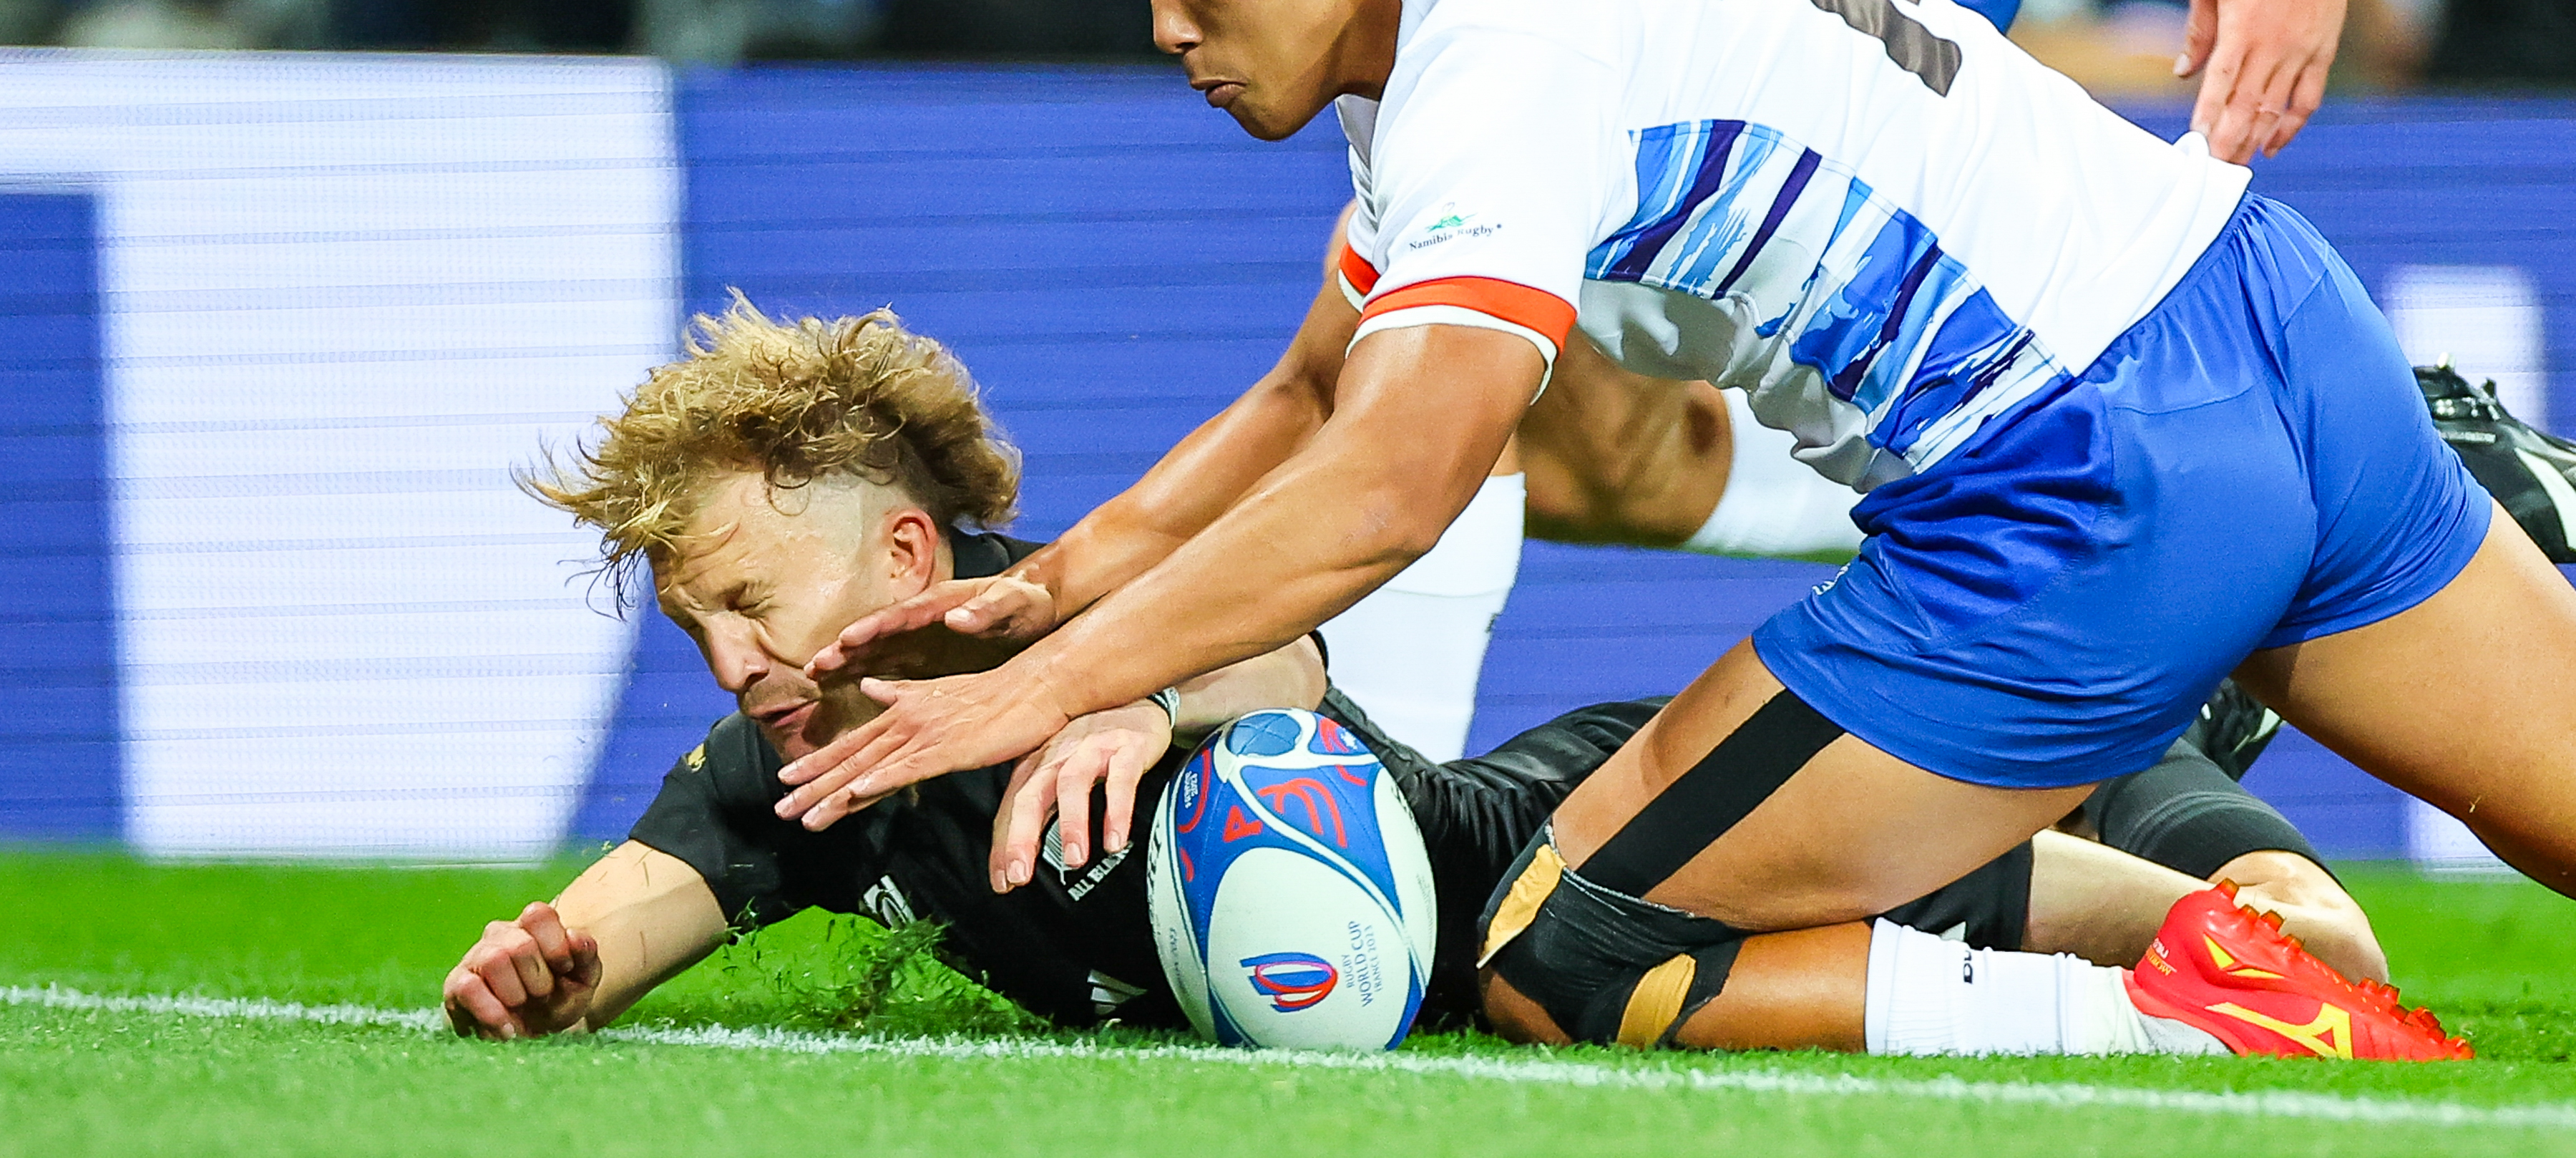 Damian McKenzie at the New Zealand VS Namibia 2023 Rugby World Cup match at Stadium De Toulouse, Toulouse, France on Friday 15 September 2023. Mandatory credit: DJ Mills / AFP